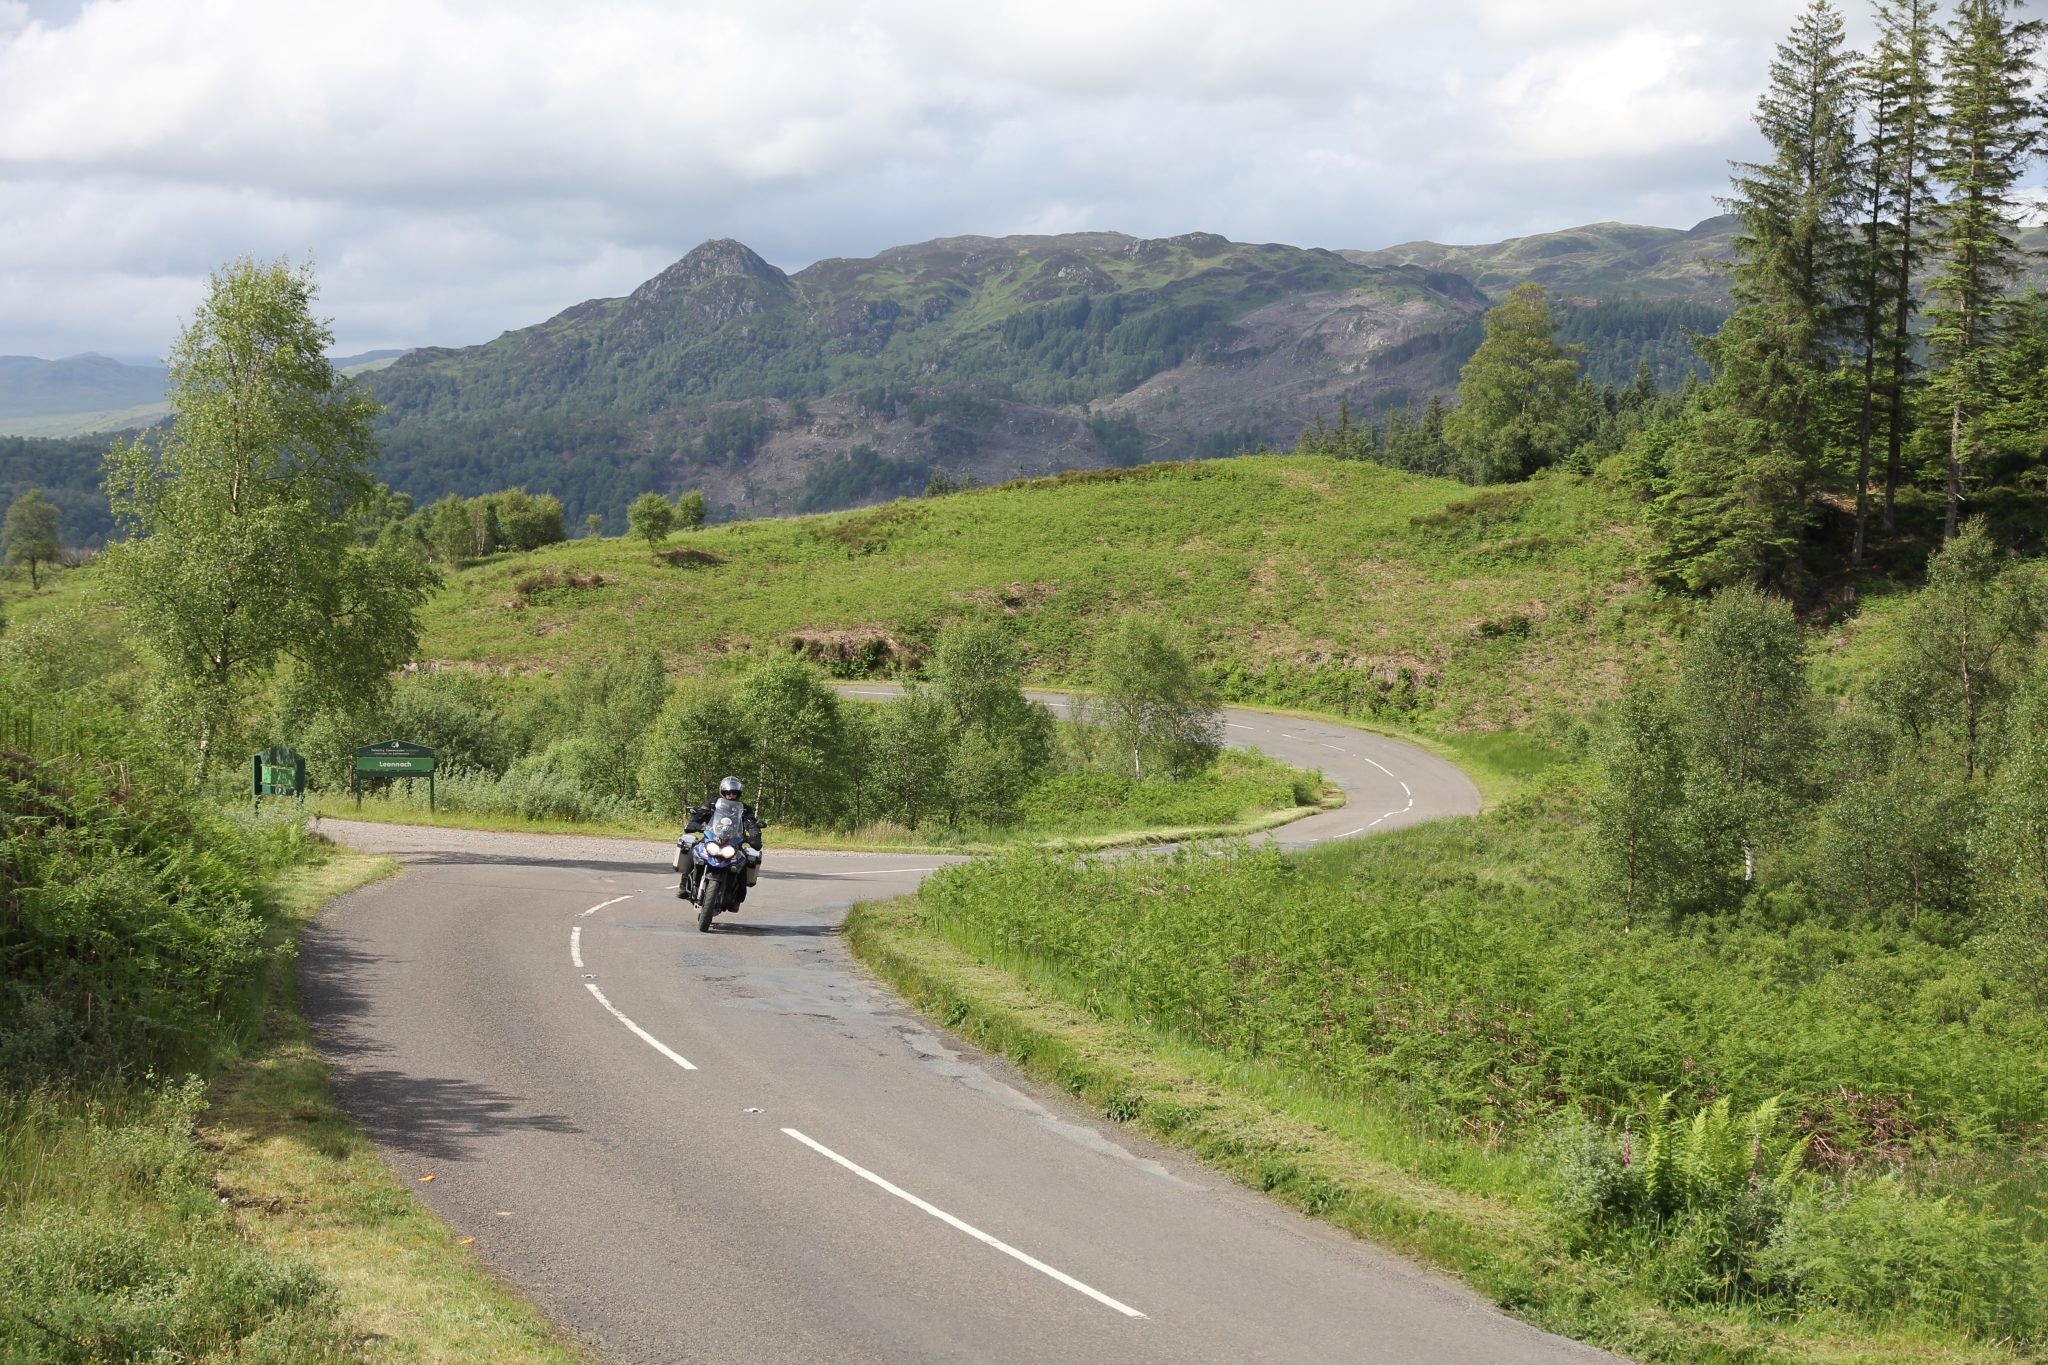 best motorcycle tours scotland